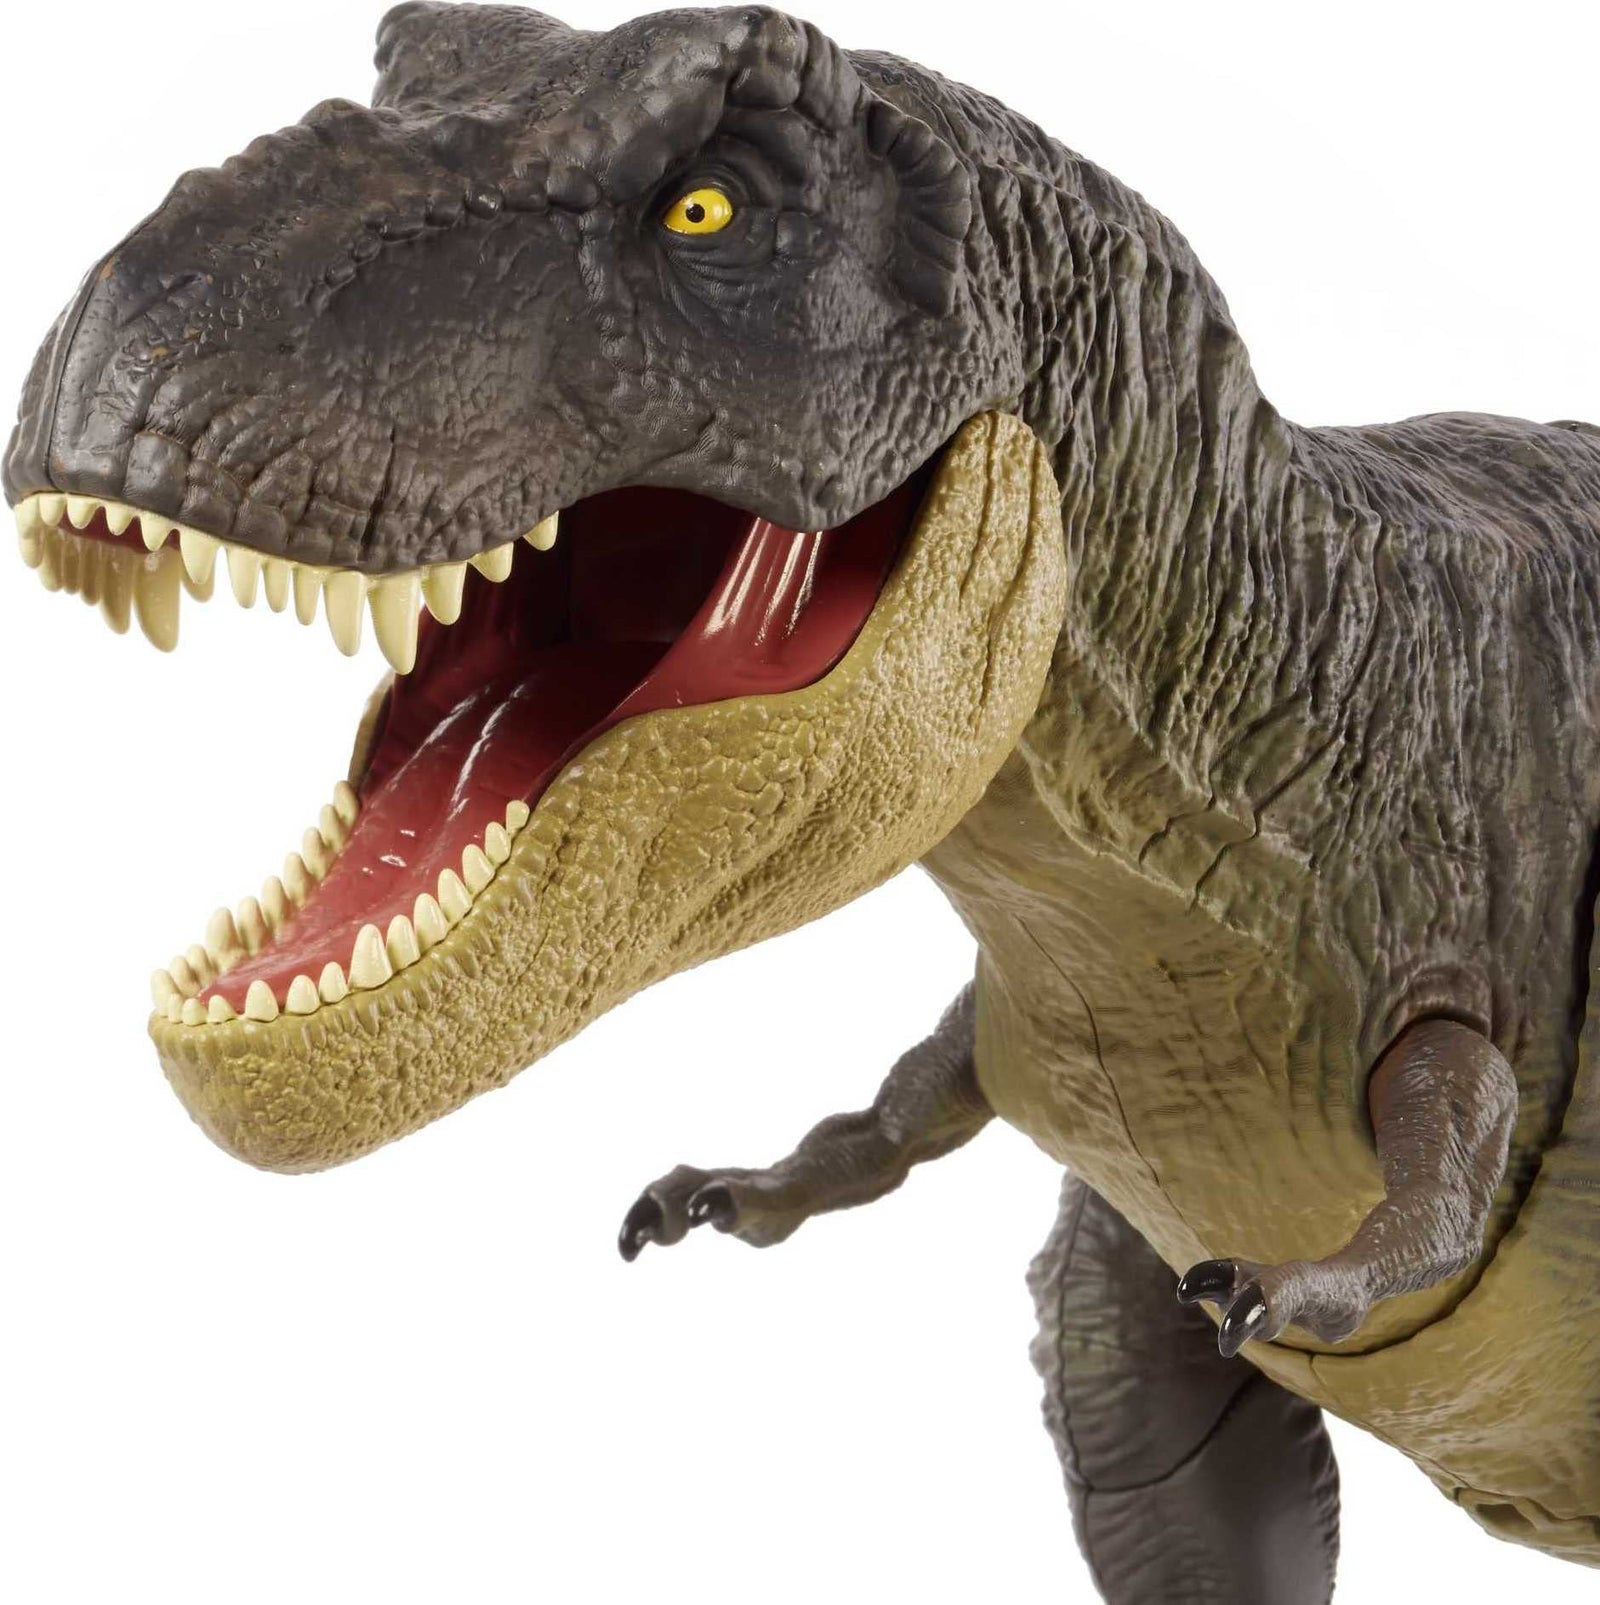 Jurassic World Stomp ‘N Escape Tyrannosaurus Rex Figure Camp Cretaceous Dinosaur Escape Toy with Stomping Movements, Movable Joints, Authentic Deco, Kids Gift Ages 4 Years & Up